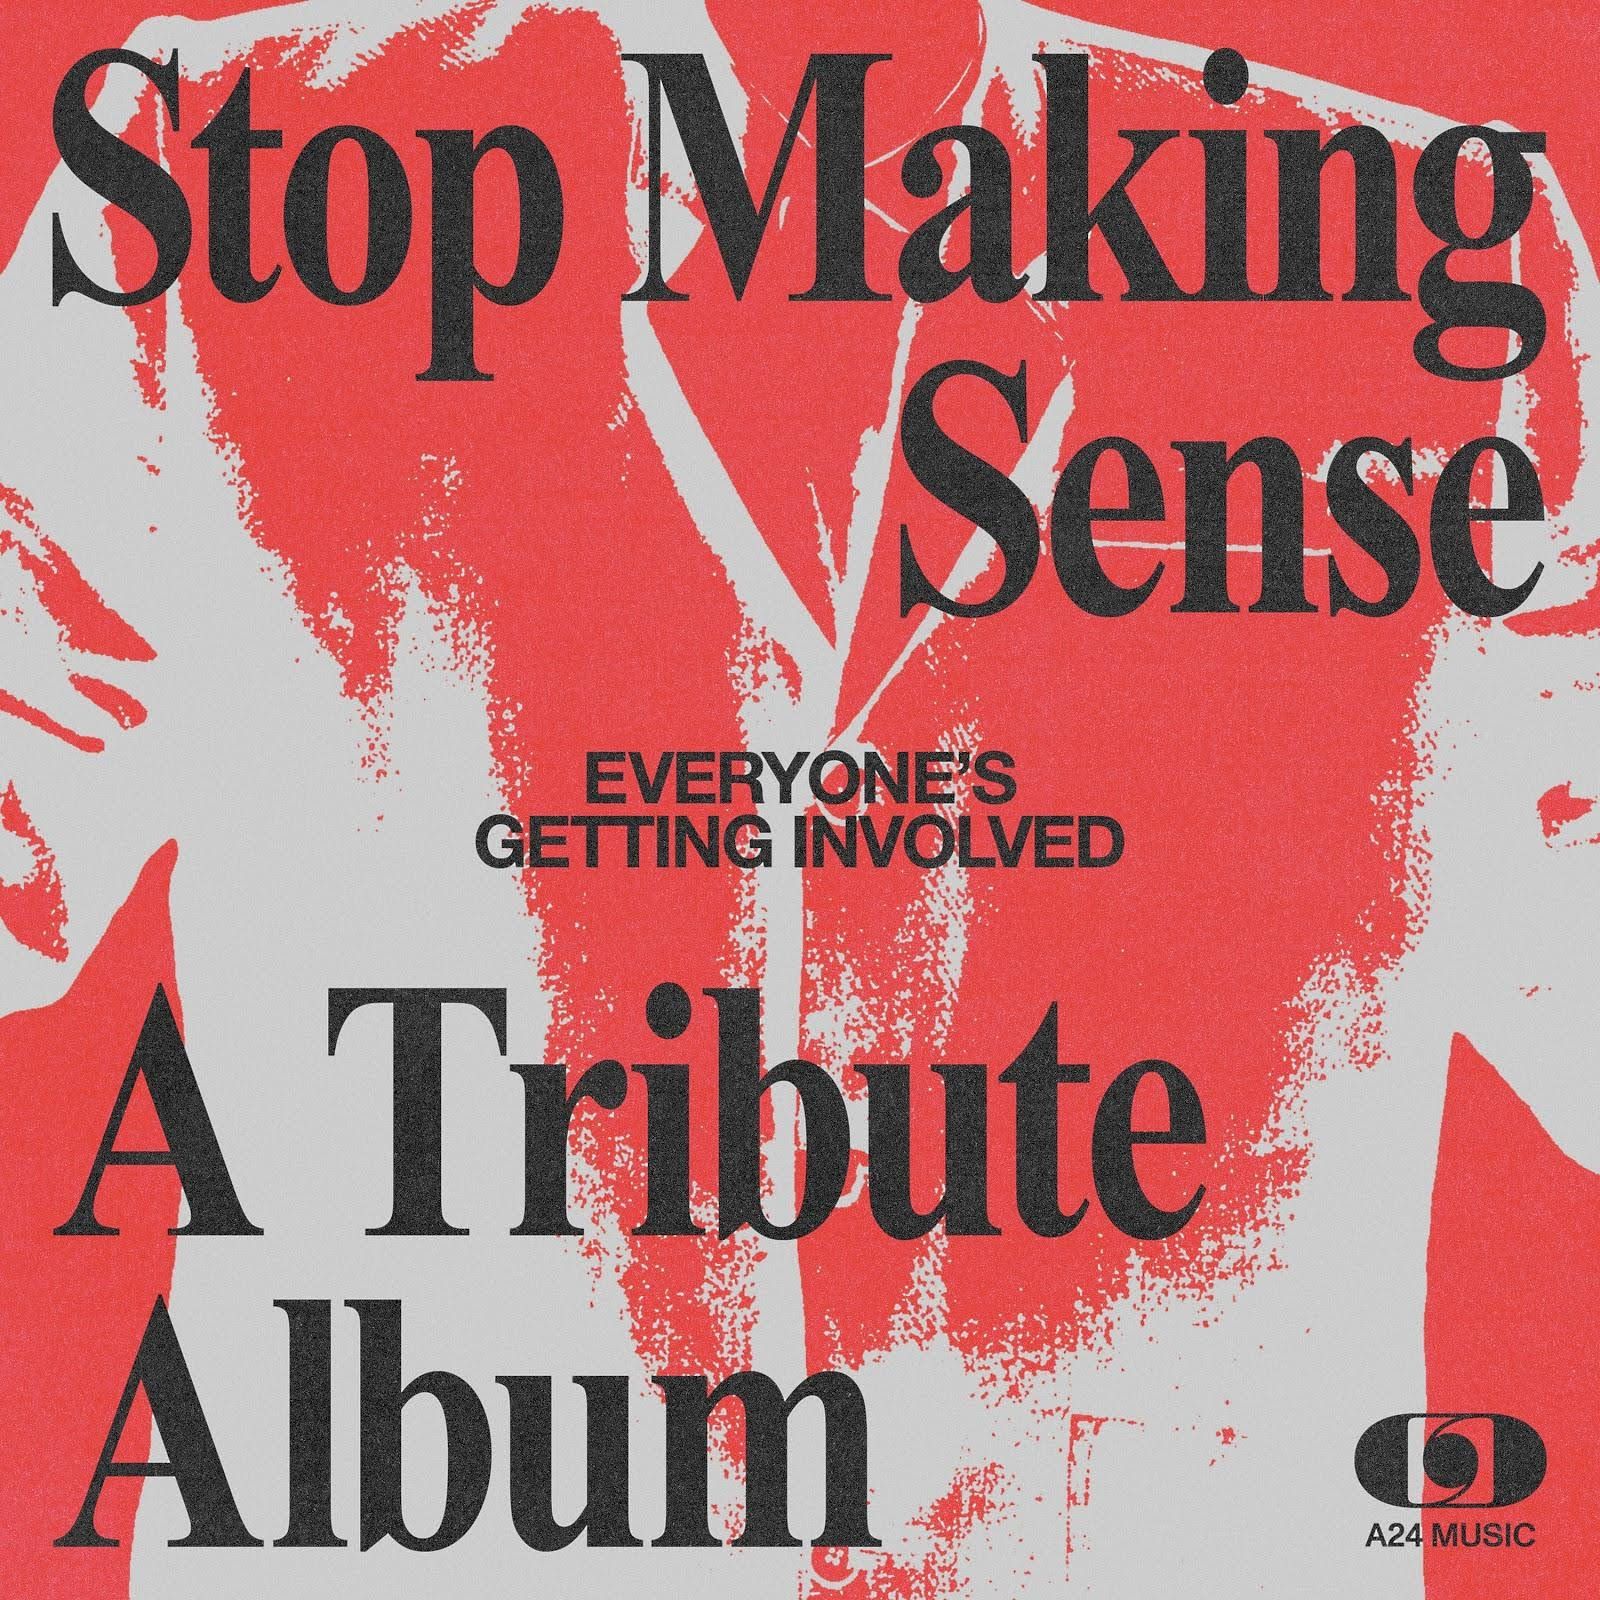 «Everyone’s Getting Involved: A Tribute to Talking Heads’ Stop Making Sense»